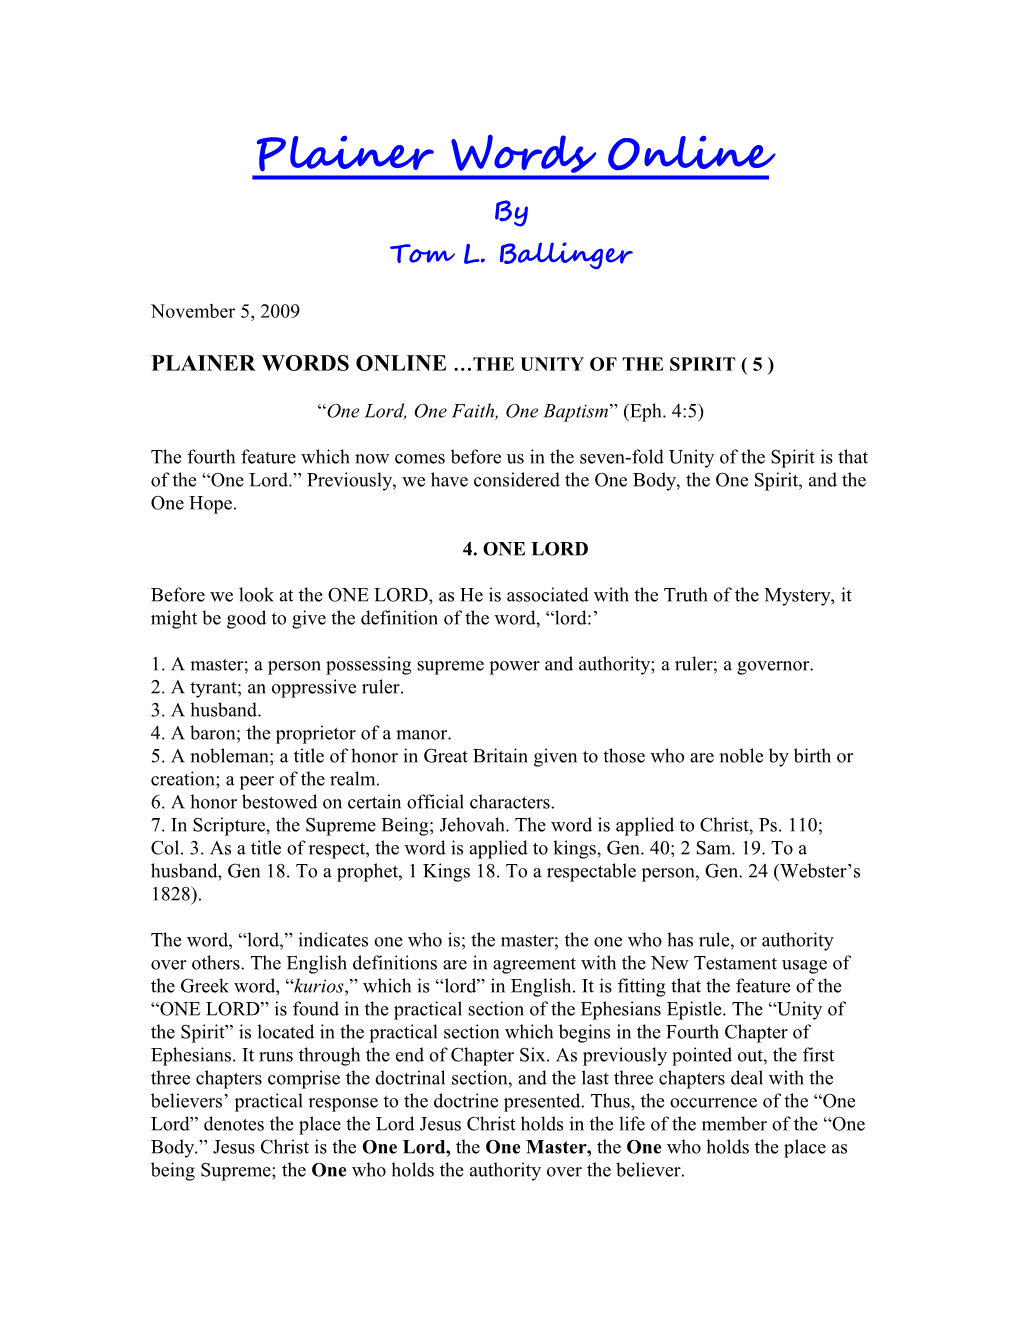 Plainer Words Online the Unity of the Spirit ( 5 )